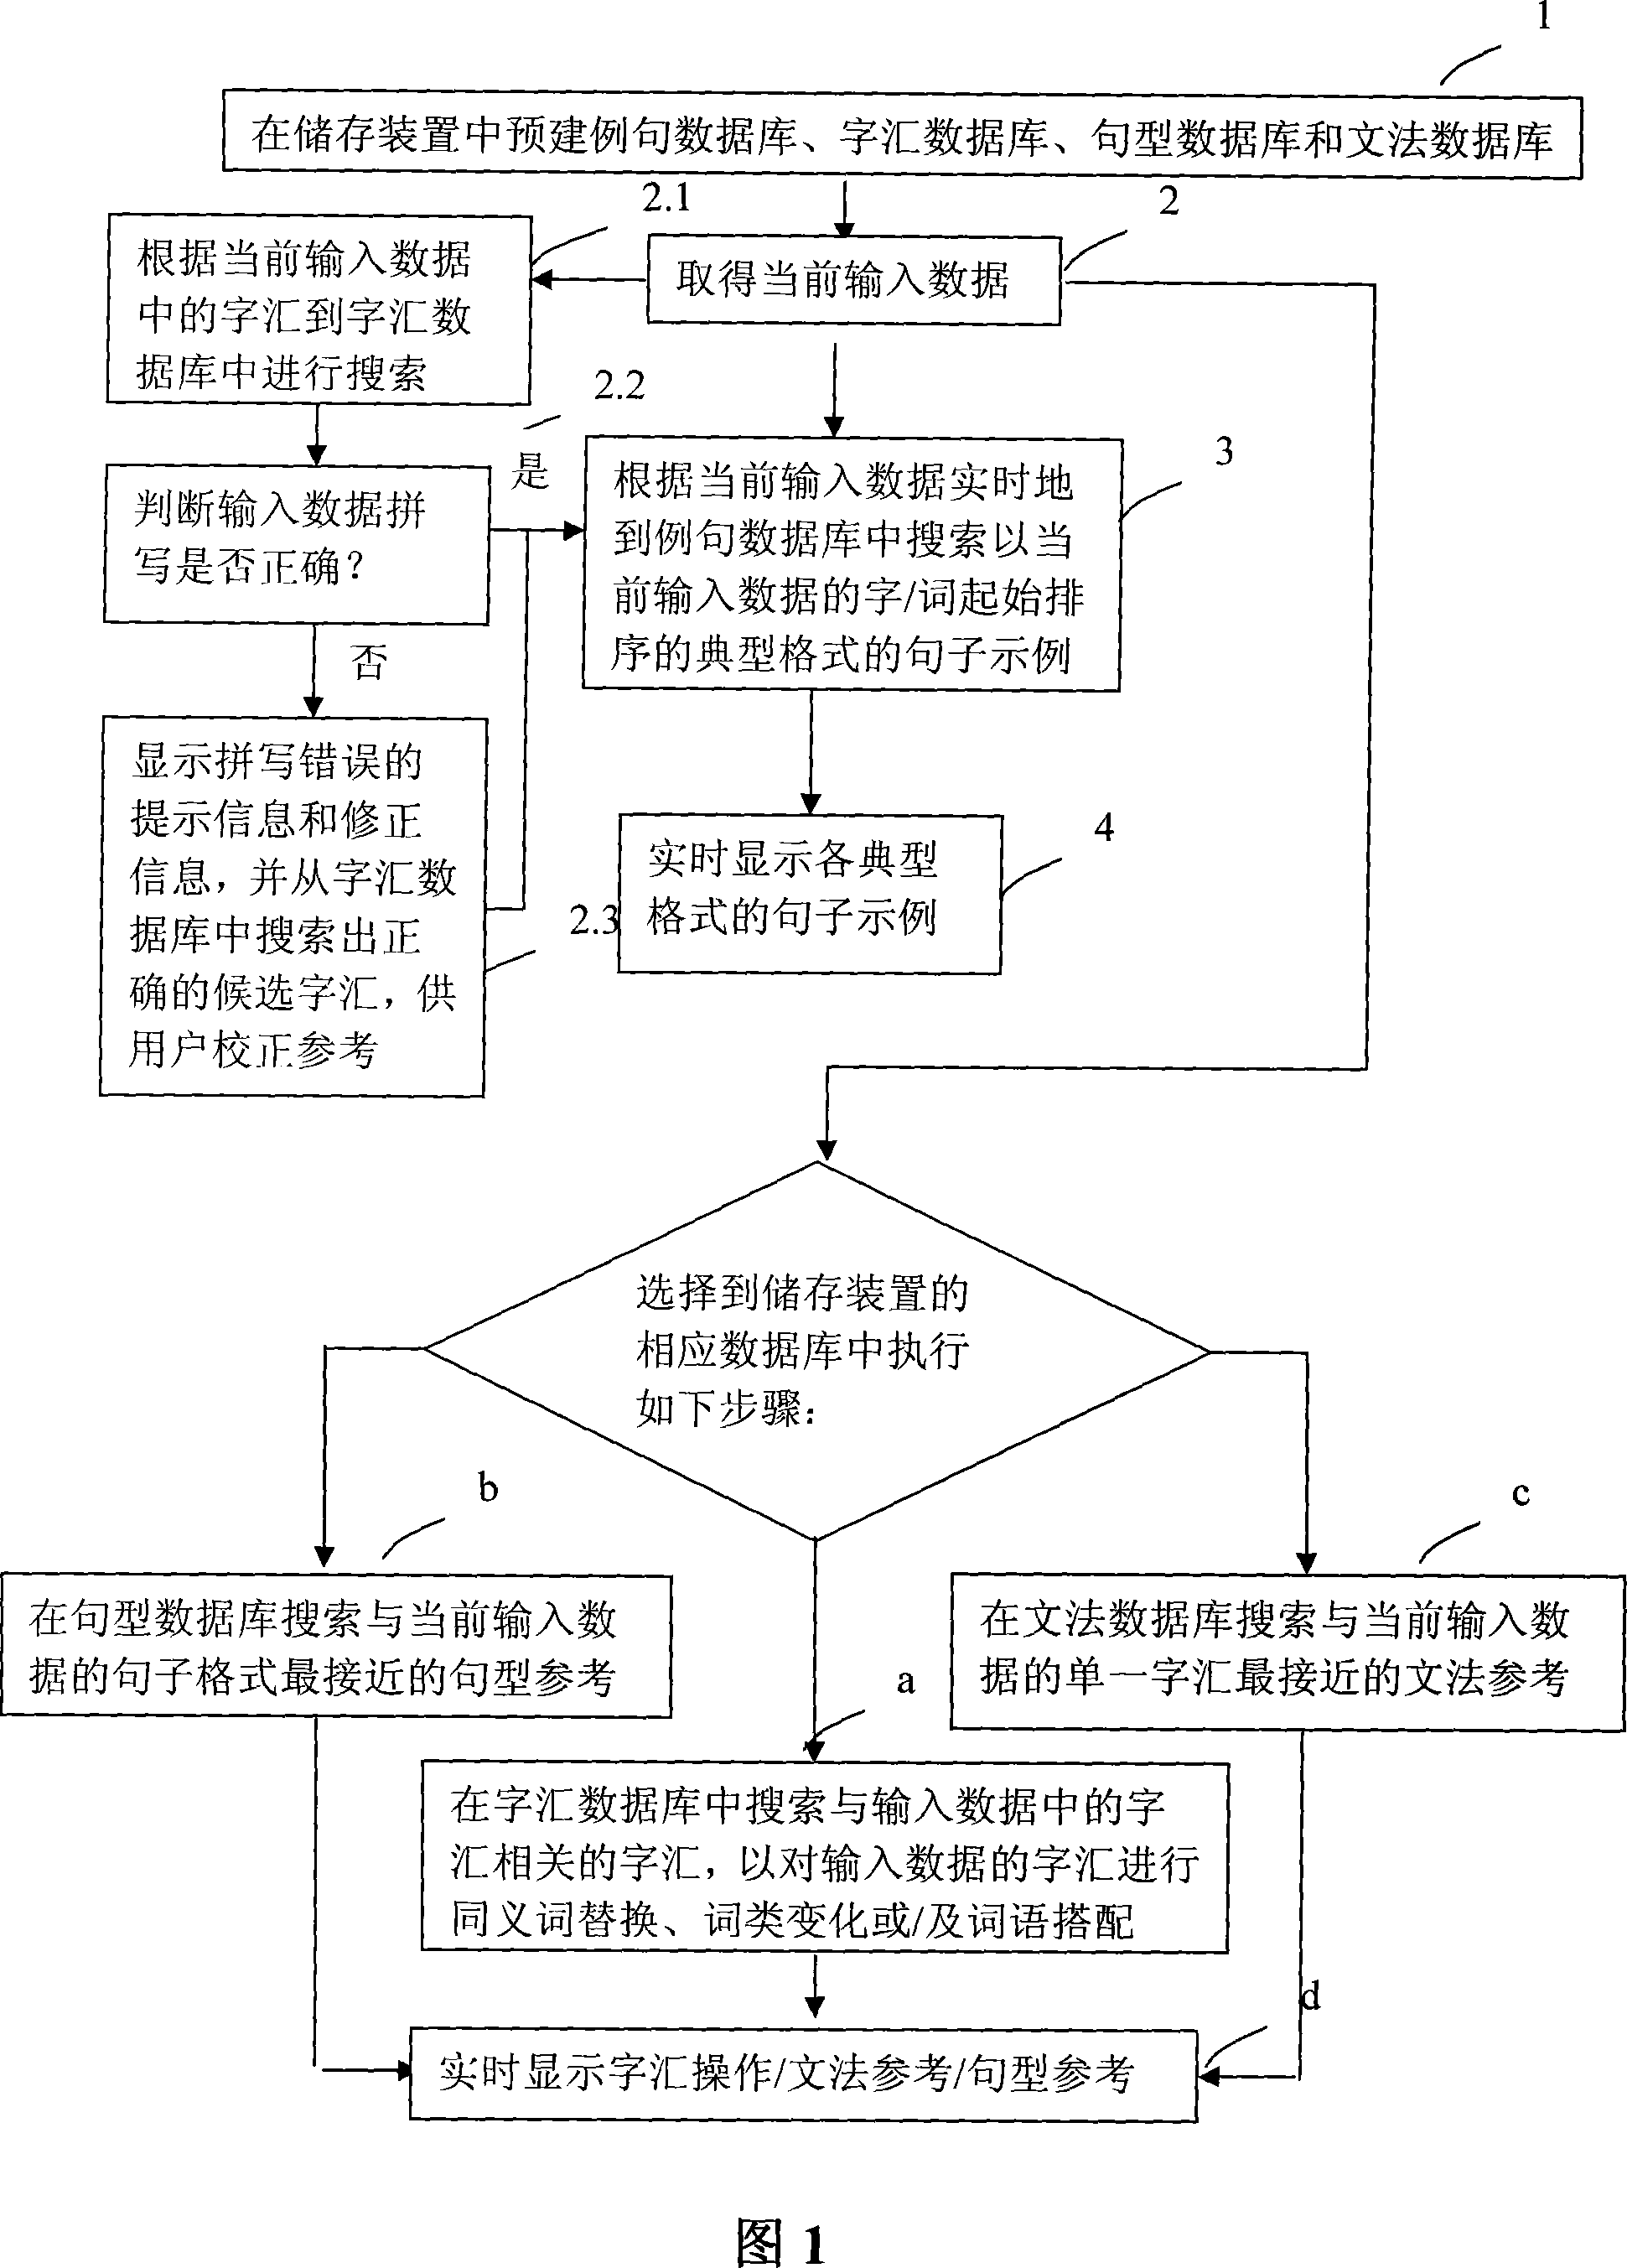 Real-time sentence-assisted writing method and system